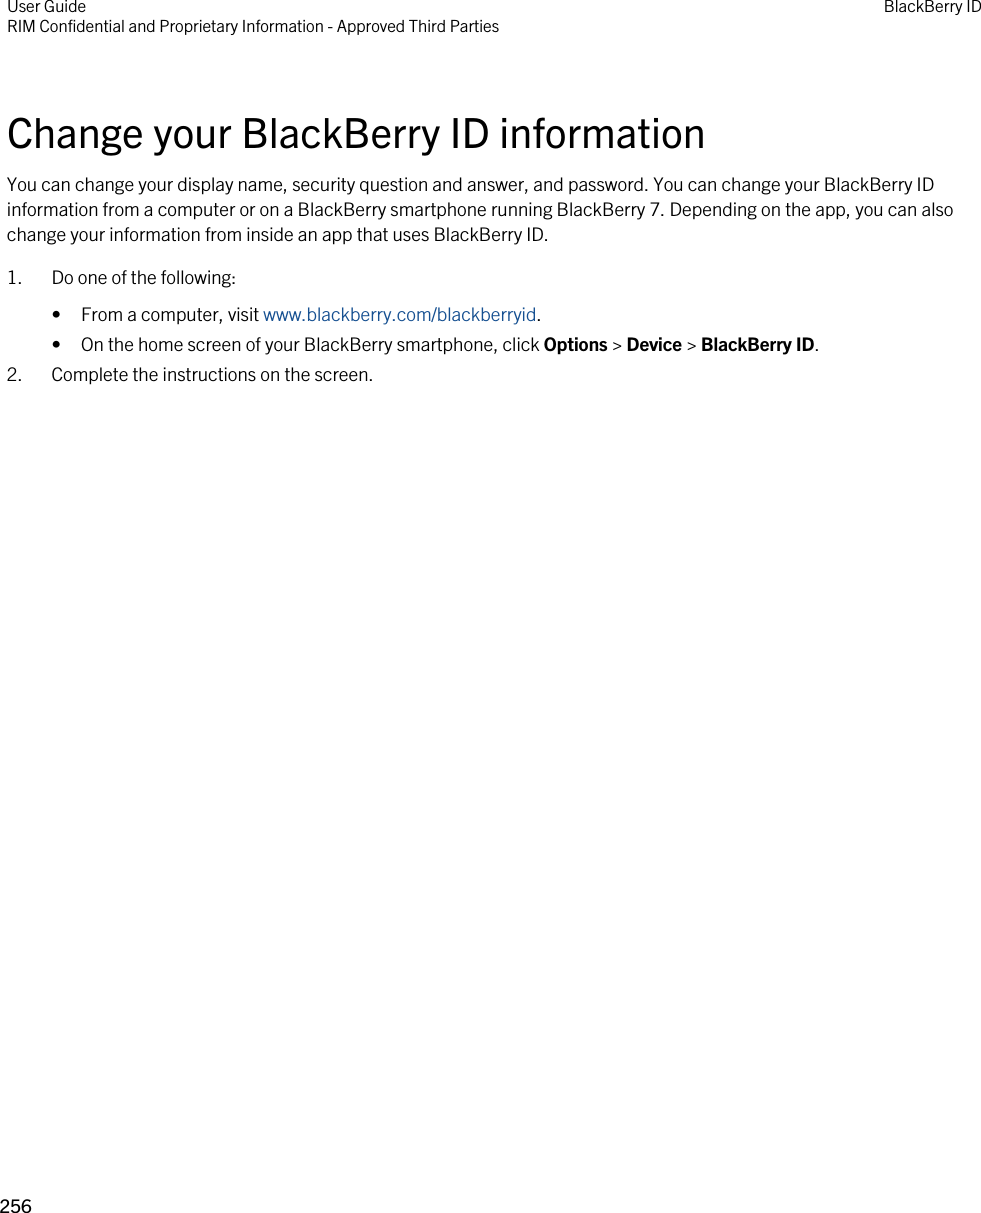 Change your BlackBerry ID informationYou can change your display name, security question and answer, and password. You can change your BlackBerry ID information from a computer or on a BlackBerry smartphone running BlackBerry 7. Depending on the app, you can also change your information from inside an app that uses BlackBerry ID.1. Do one of the following:• From a computer, visit www.blackberry.com/blackberryid.• On the home screen of your BlackBerry smartphone, click Options &gt; Device &gt; BlackBerry ID.2. Complete the instructions on the screen.User GuideRIM Confidential and Proprietary Information - Approved Third Parties BlackBerry ID256 